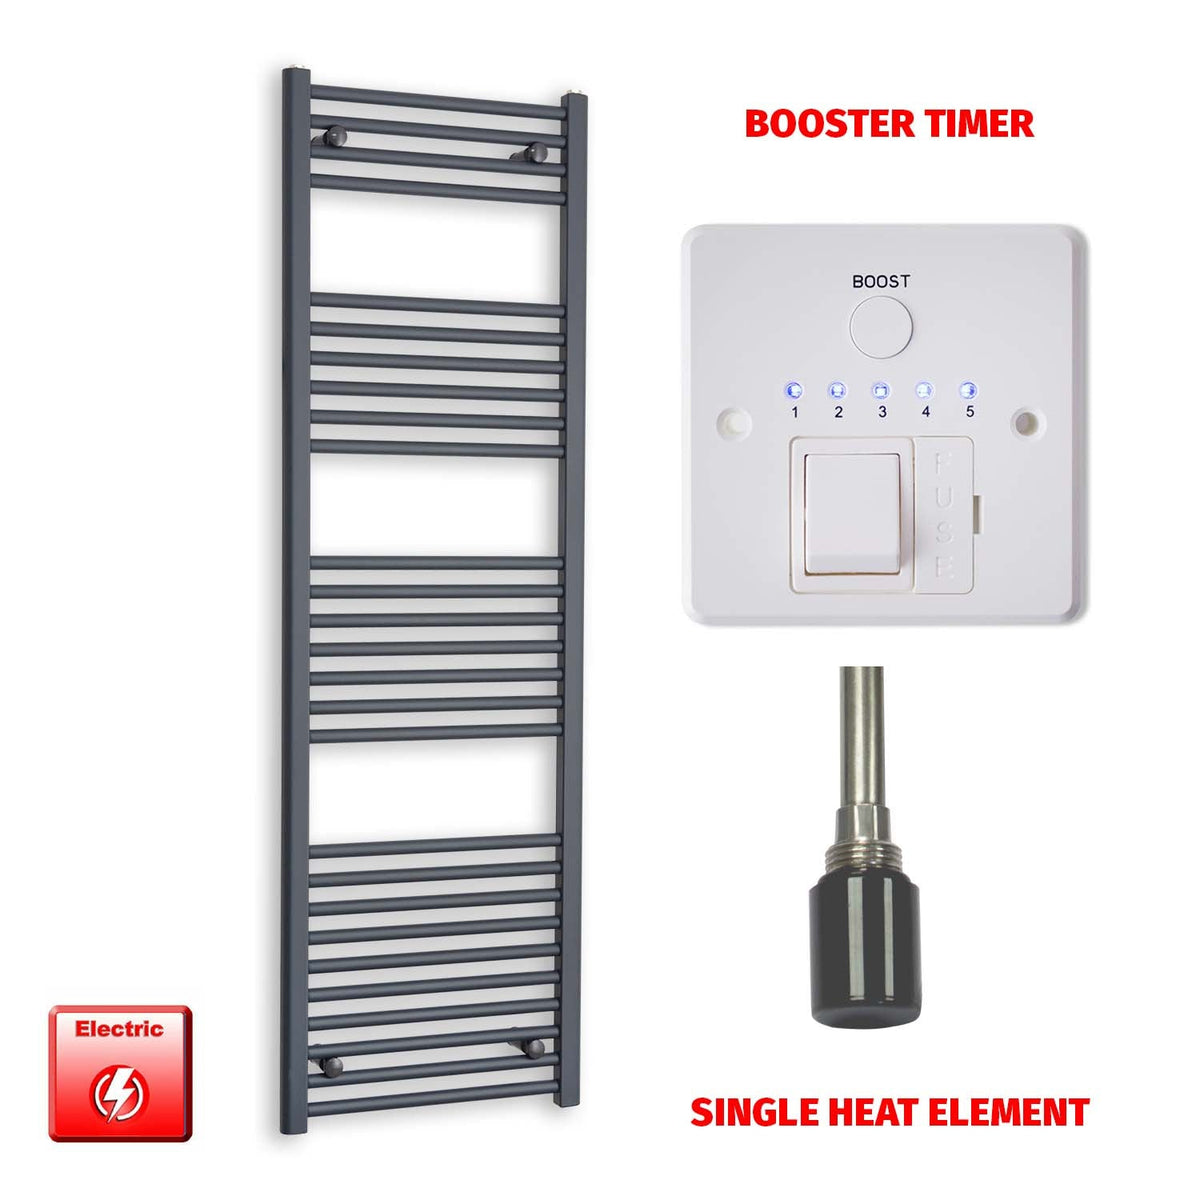 1600mm High 500mm Wide Flat Anthracite Pre-Filled Electric Heated Towel Rail Radiator HTR  Single heat element Booster timer